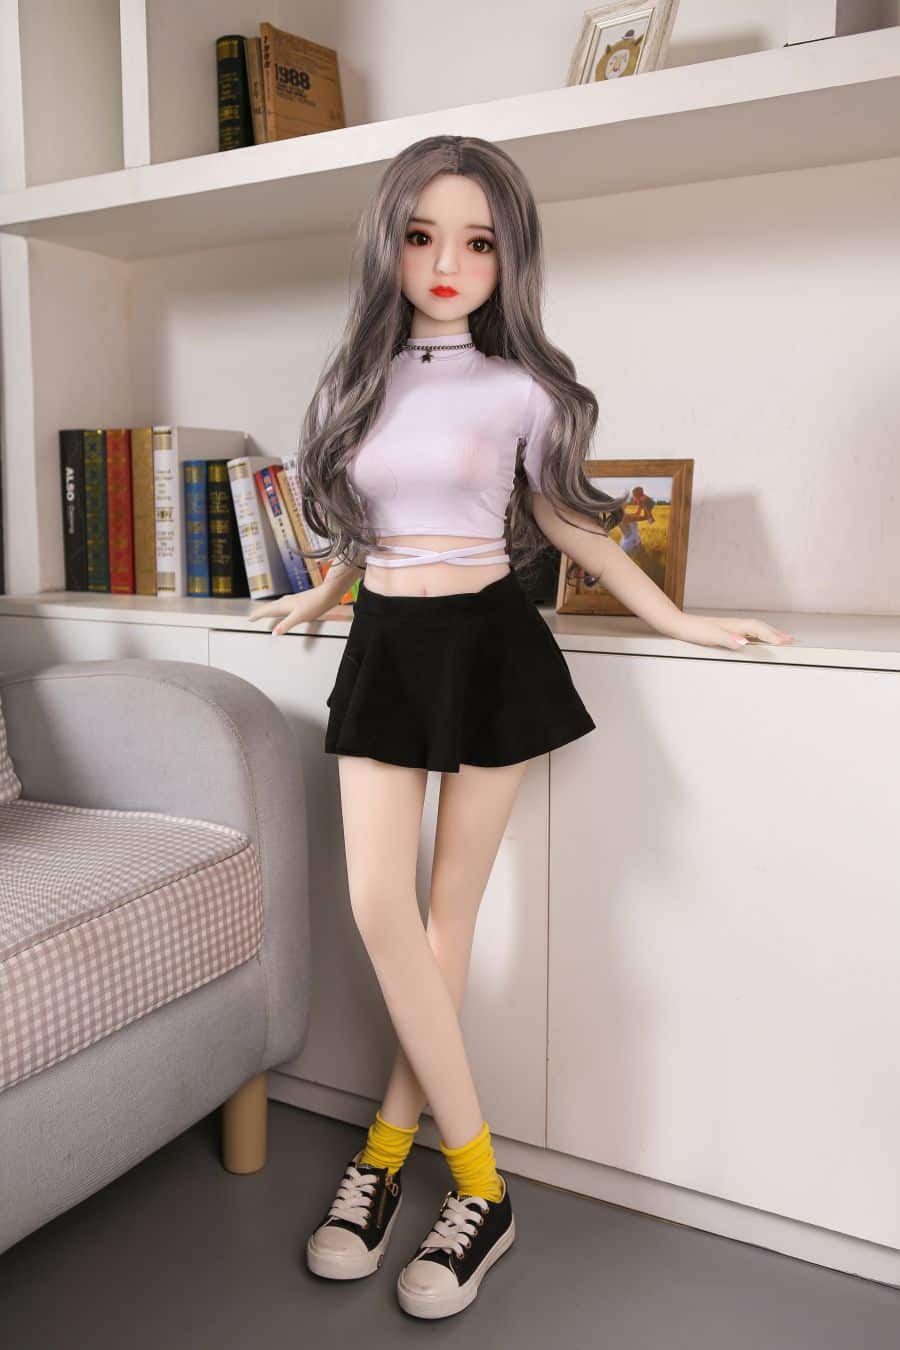 68cm real doll3